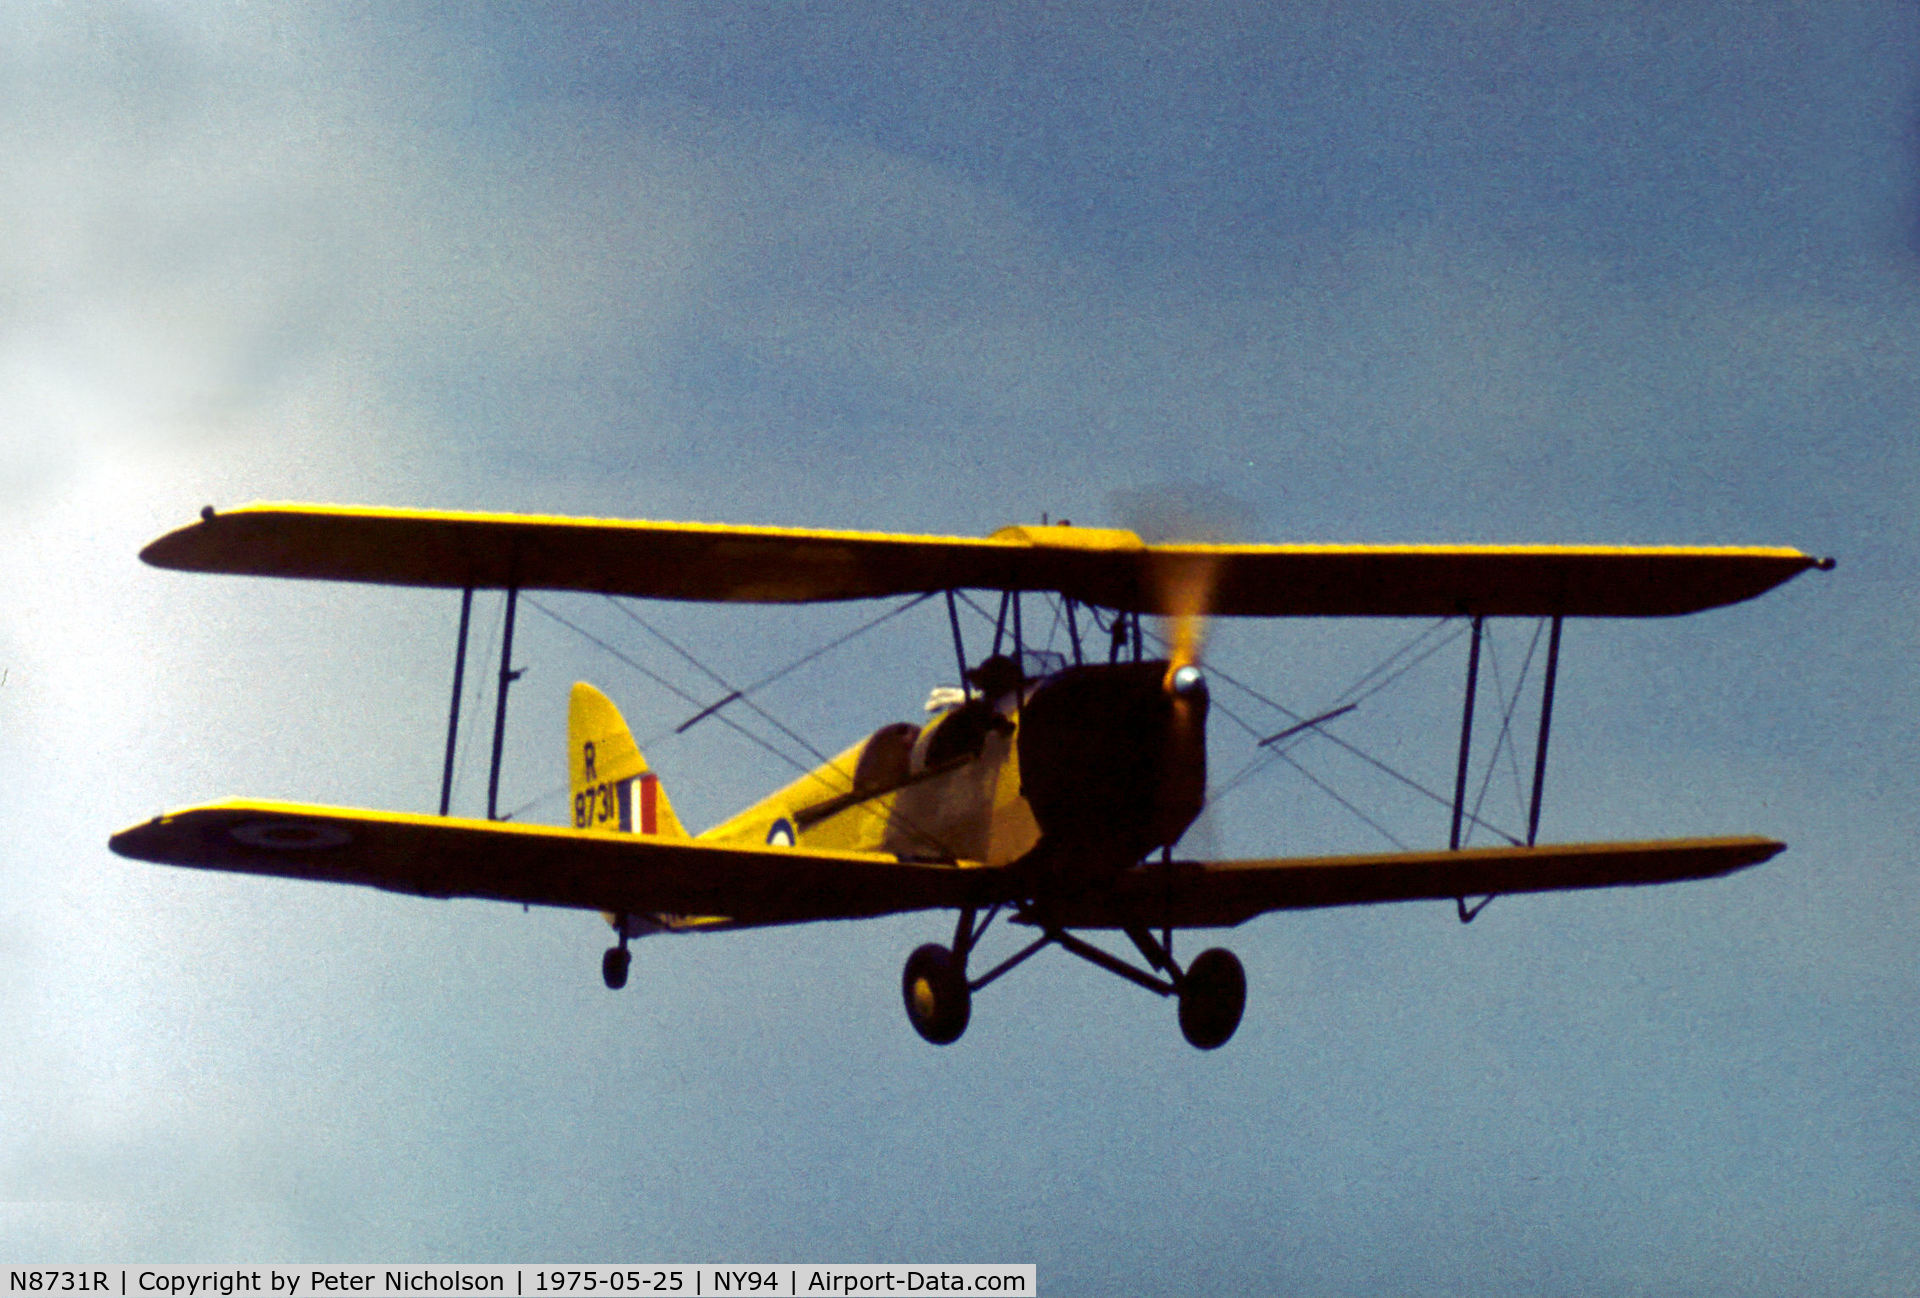 N8731R, 1941 De Havilland Canada DH-82C Tiger Moth C/N DHC1848, DH.82C Tiger Moth in action at the Rhinebeck Airshow in May 1975.